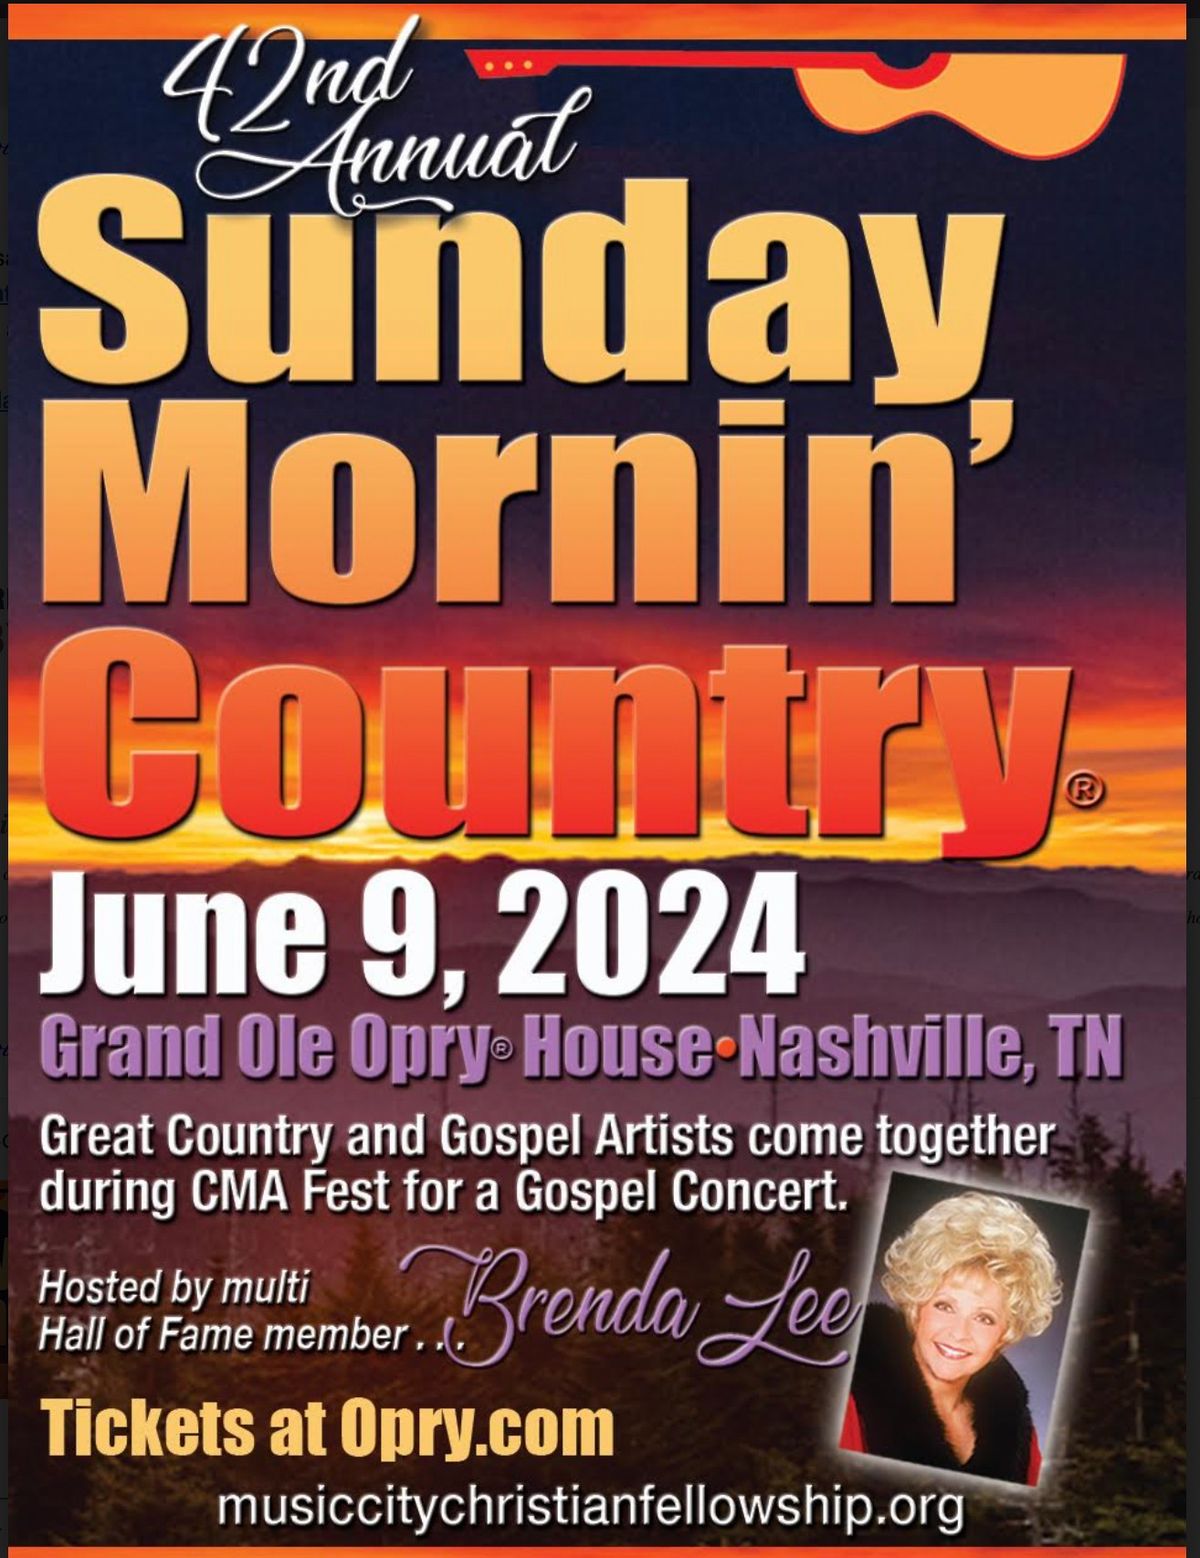 Sunday Mornin' Country's event